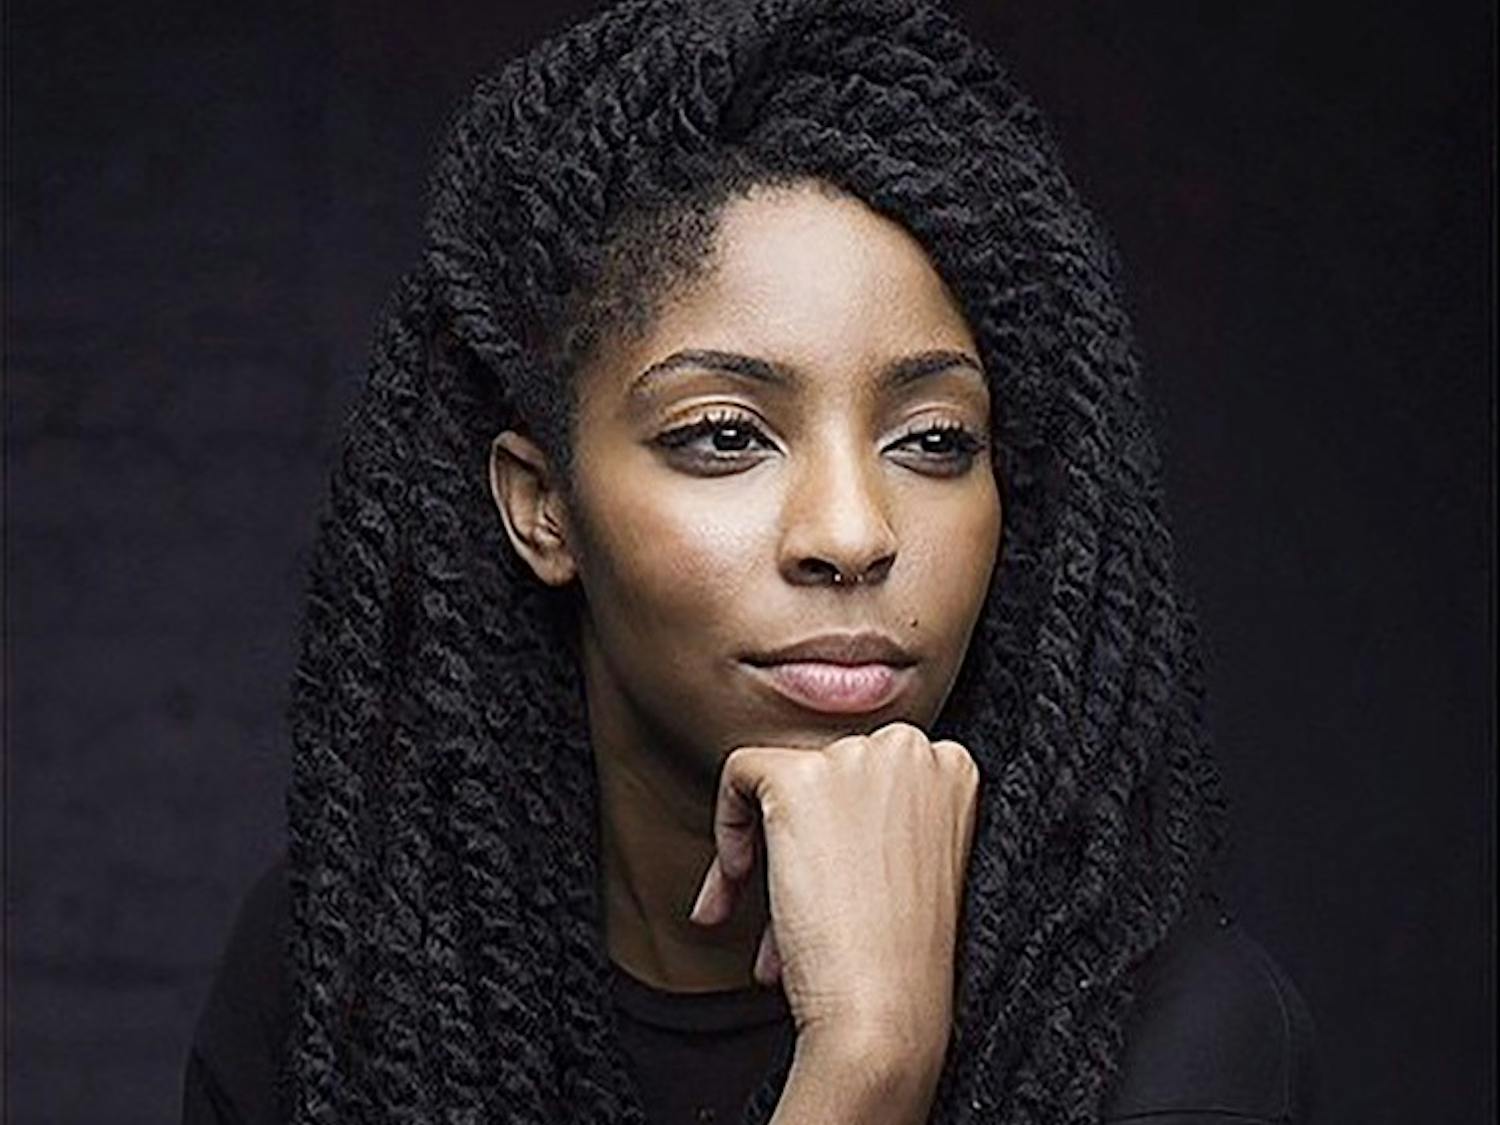 UB's 14th annual comedy series, featuring The Daily Show correspondent Jessica Williams, has been rescheduled for April 2. Williams was originally set to perform in the Center for the Arts on March 12.